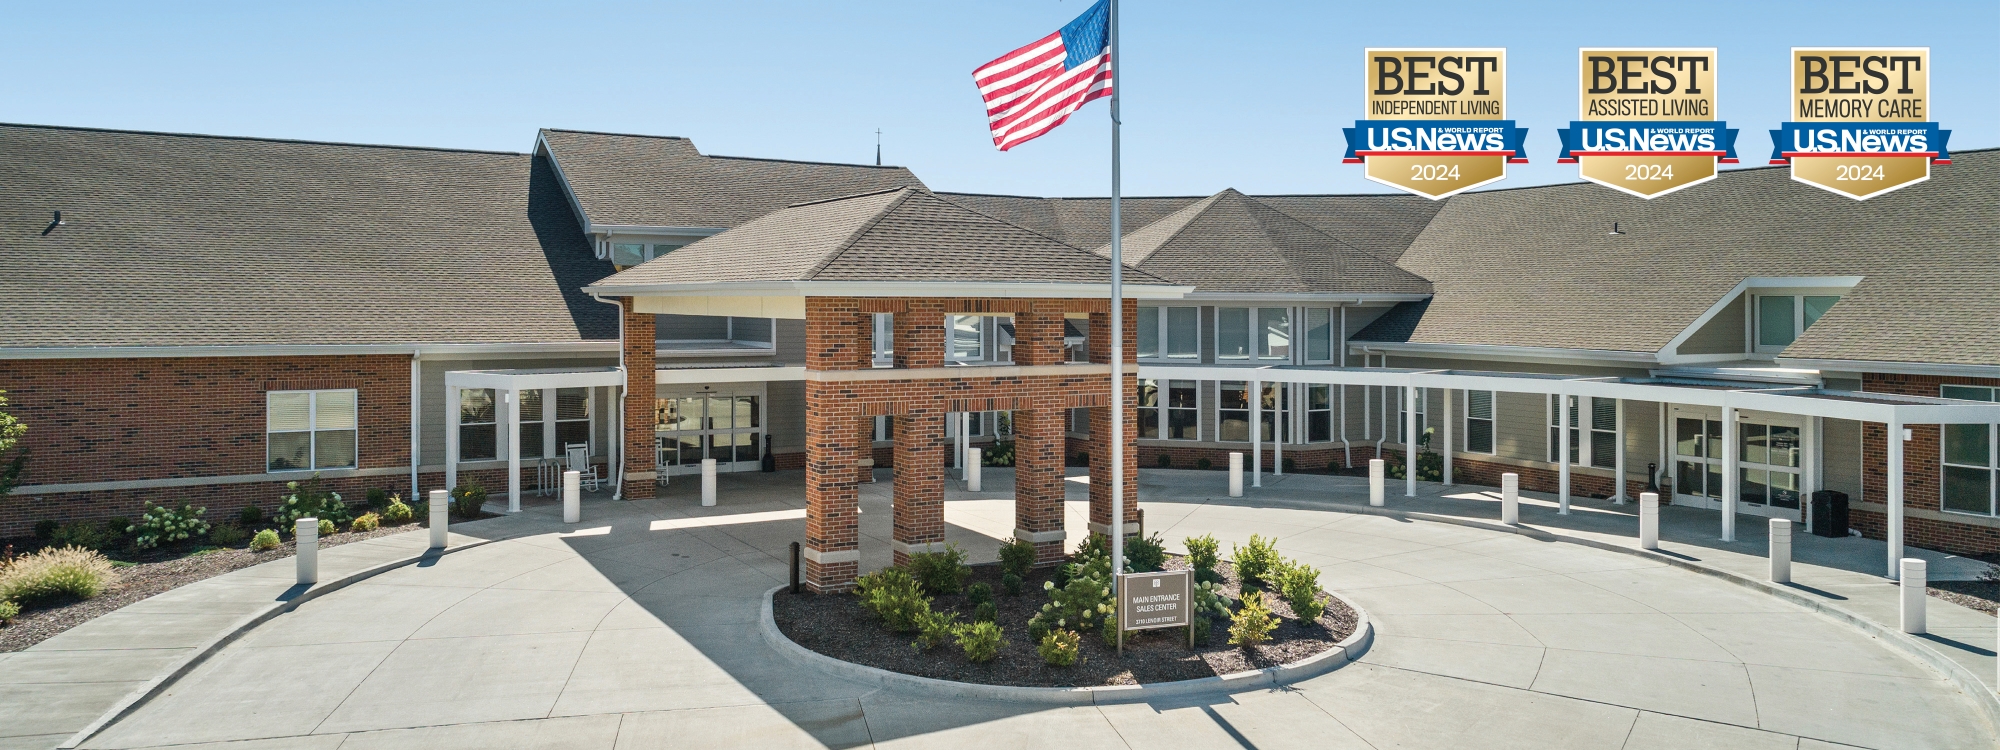 Entry of Lenoir Woods assisted living in Columbia, MO, awarded Best Independent Living, Memory Care, and Continuing Care Retirement Community by US News.